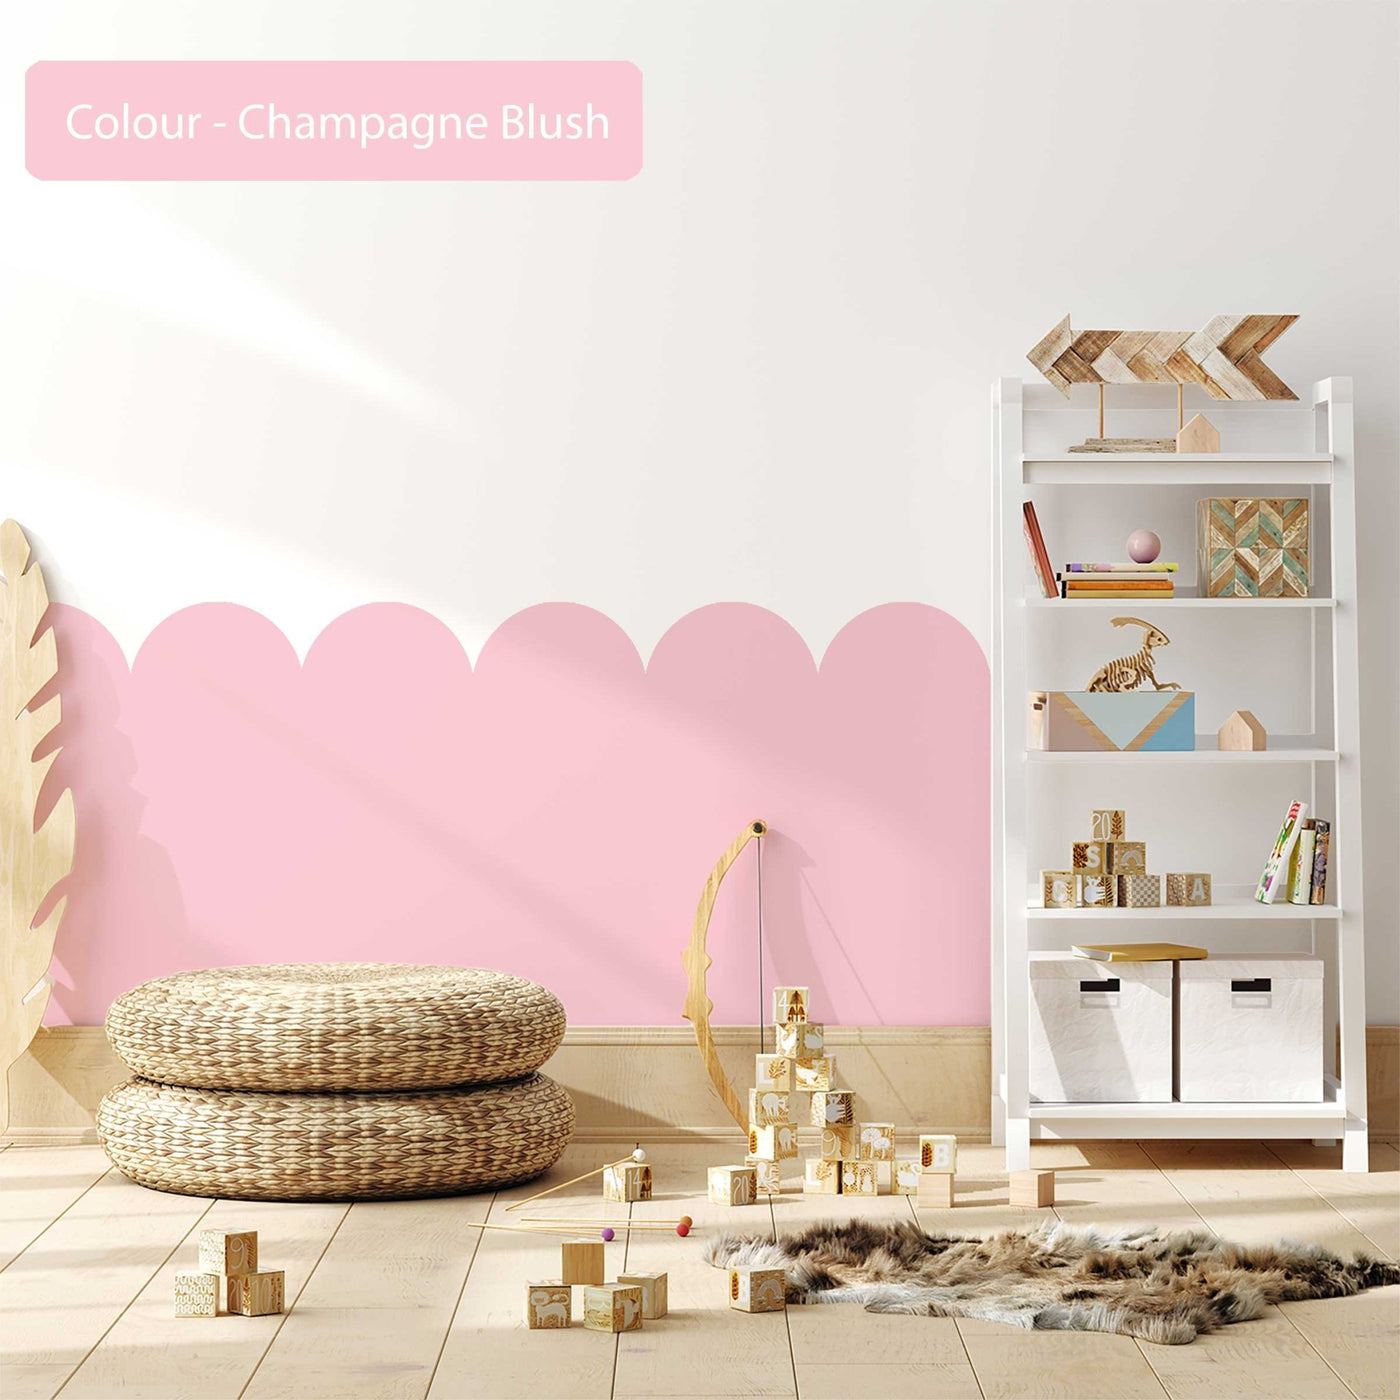 Scallop Wall Decals Champagne Blush Pink - Jack Harry and Ollie